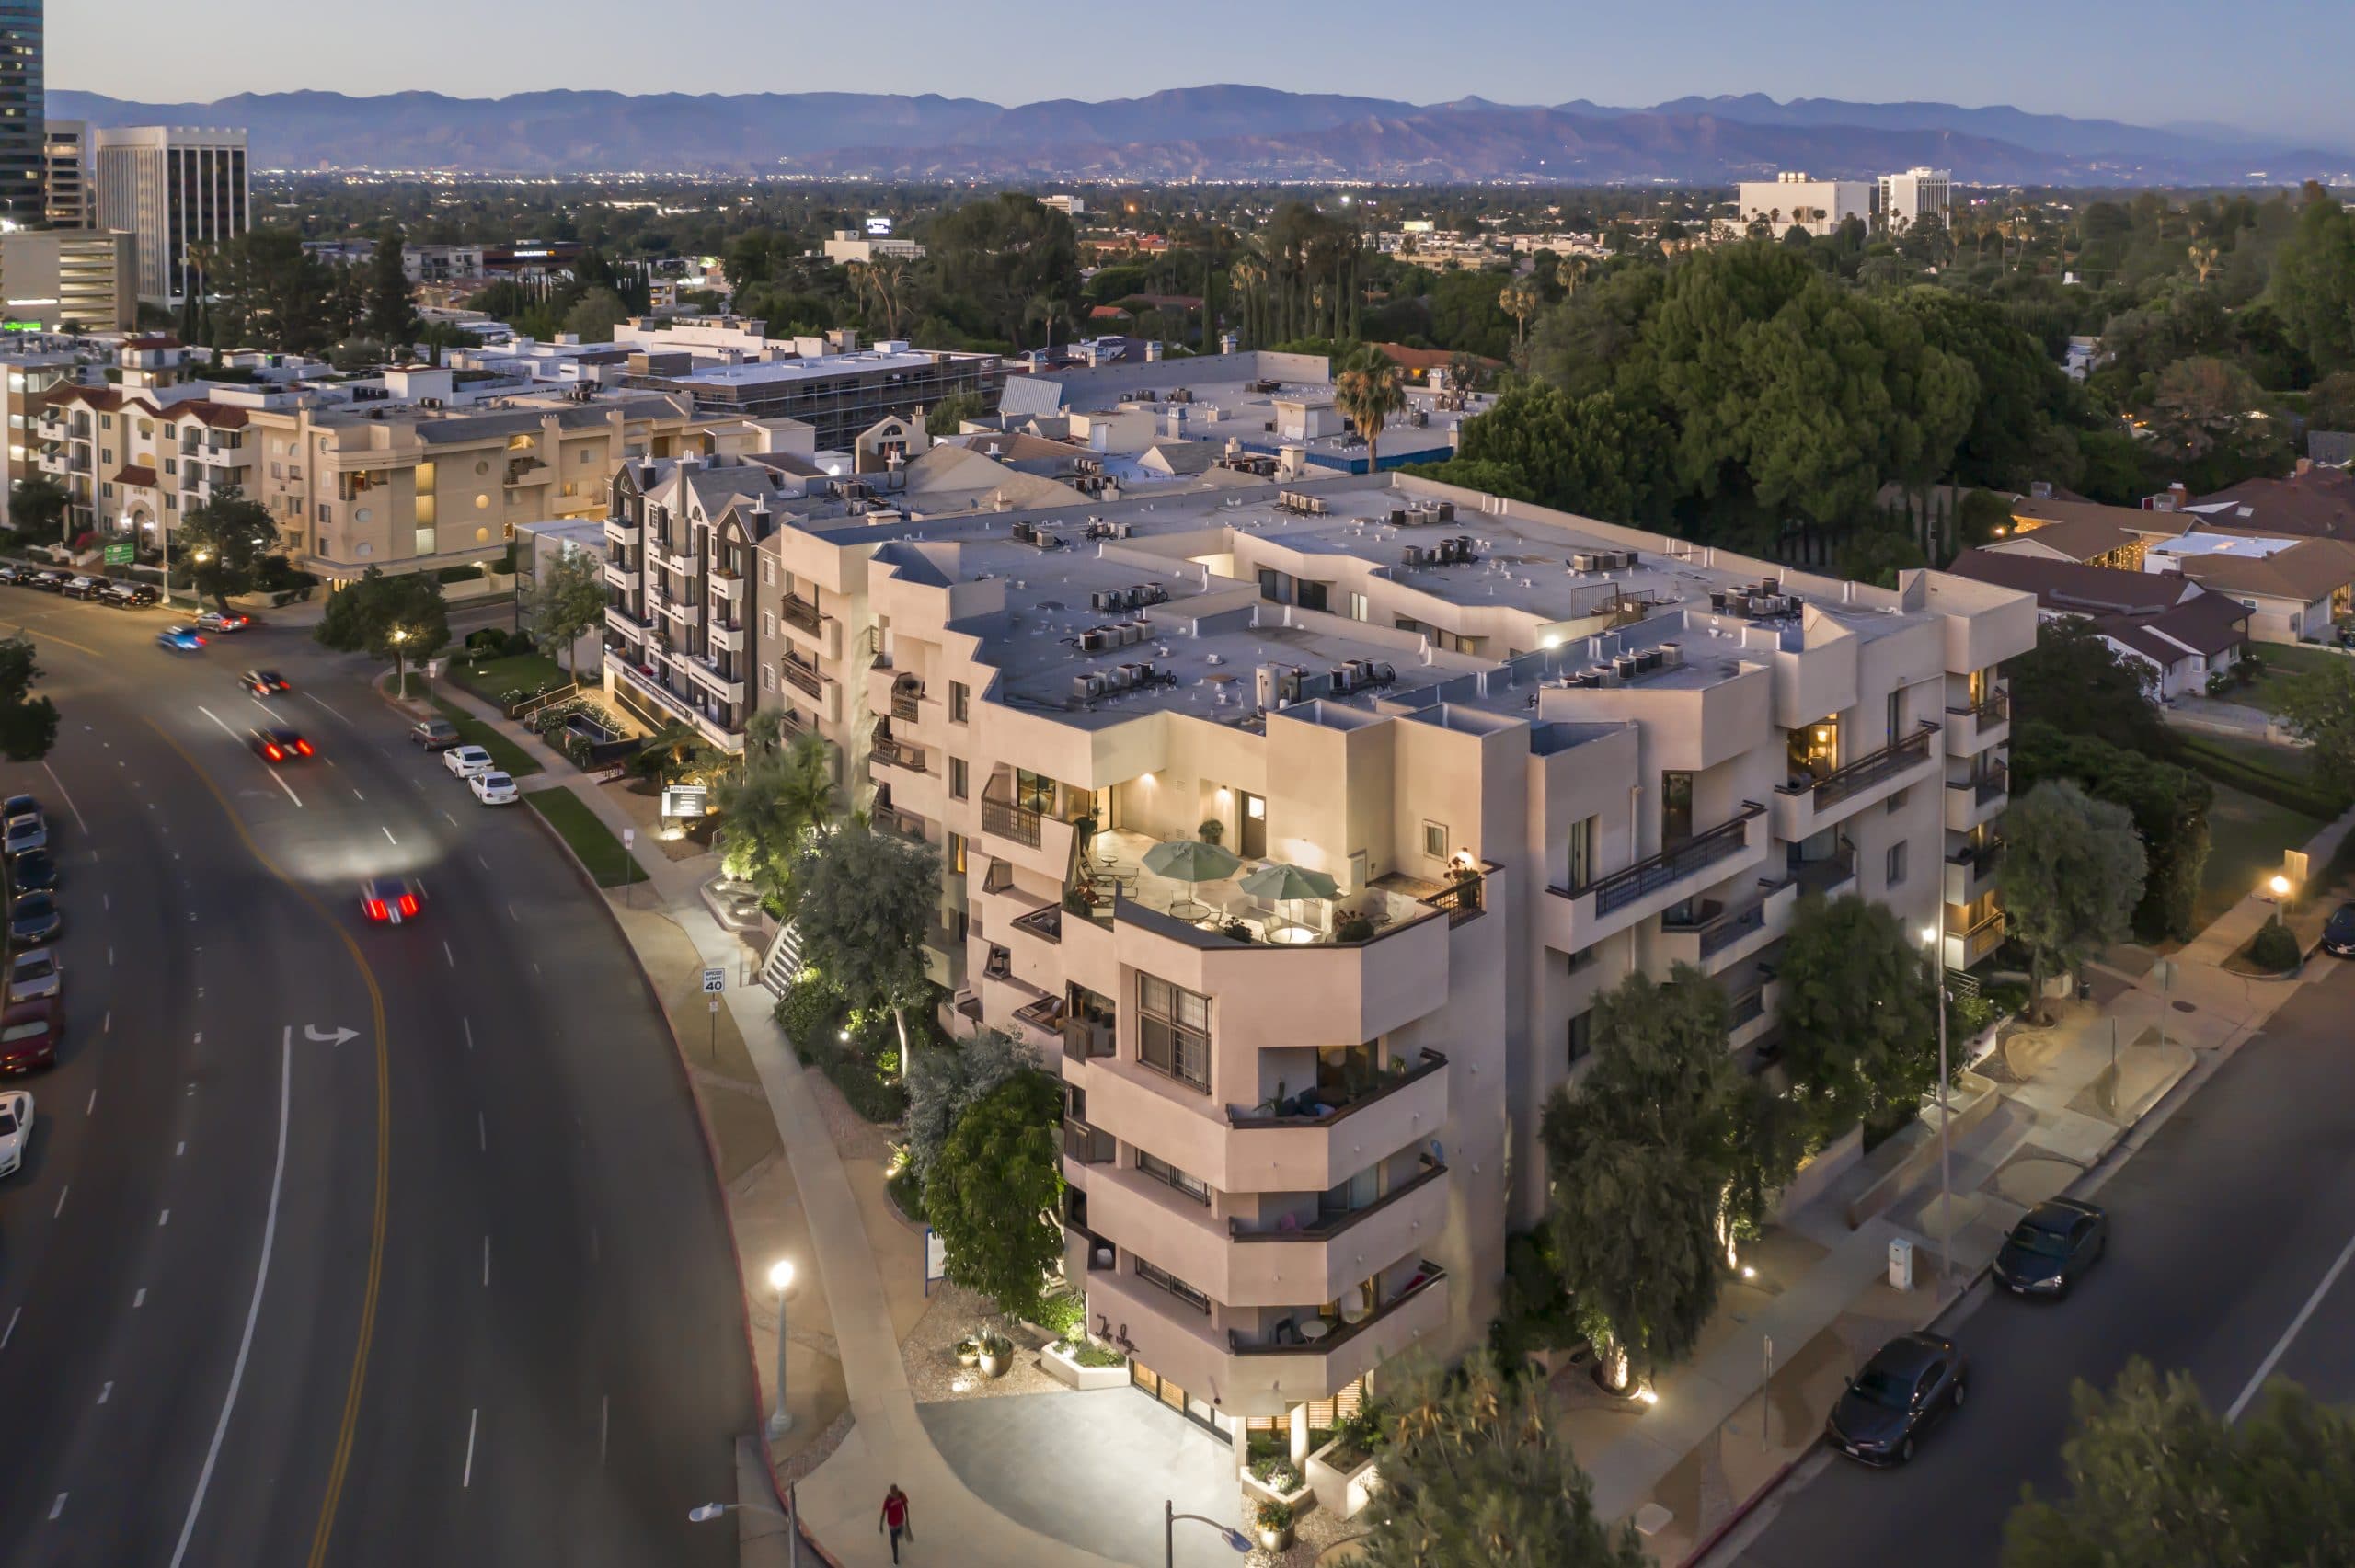 Apartments In Sherman Oaks CA Night Time Aerial View Of Community Cross Streets And Surrounding Area Scaled 